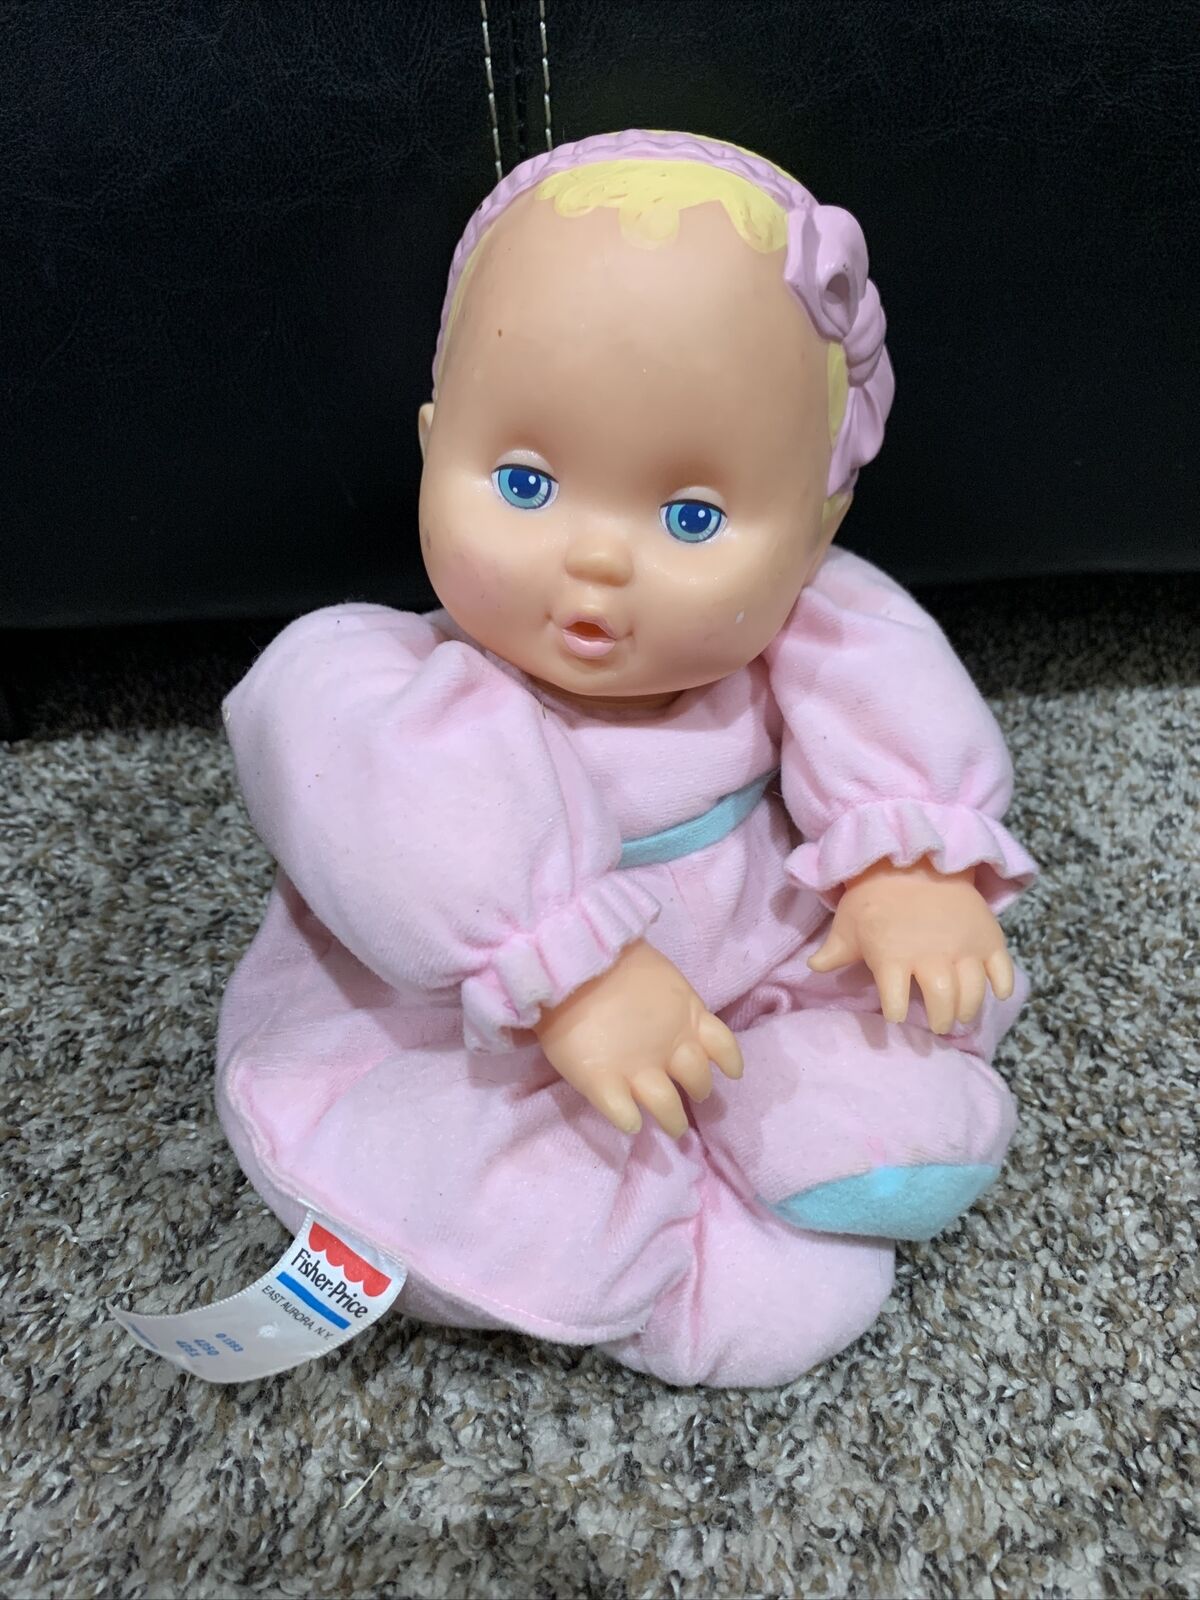 Cuddle-bye Baby Musical Doll #4250 Brahms Lullaby 1993 Fisher Price Cloth Baby